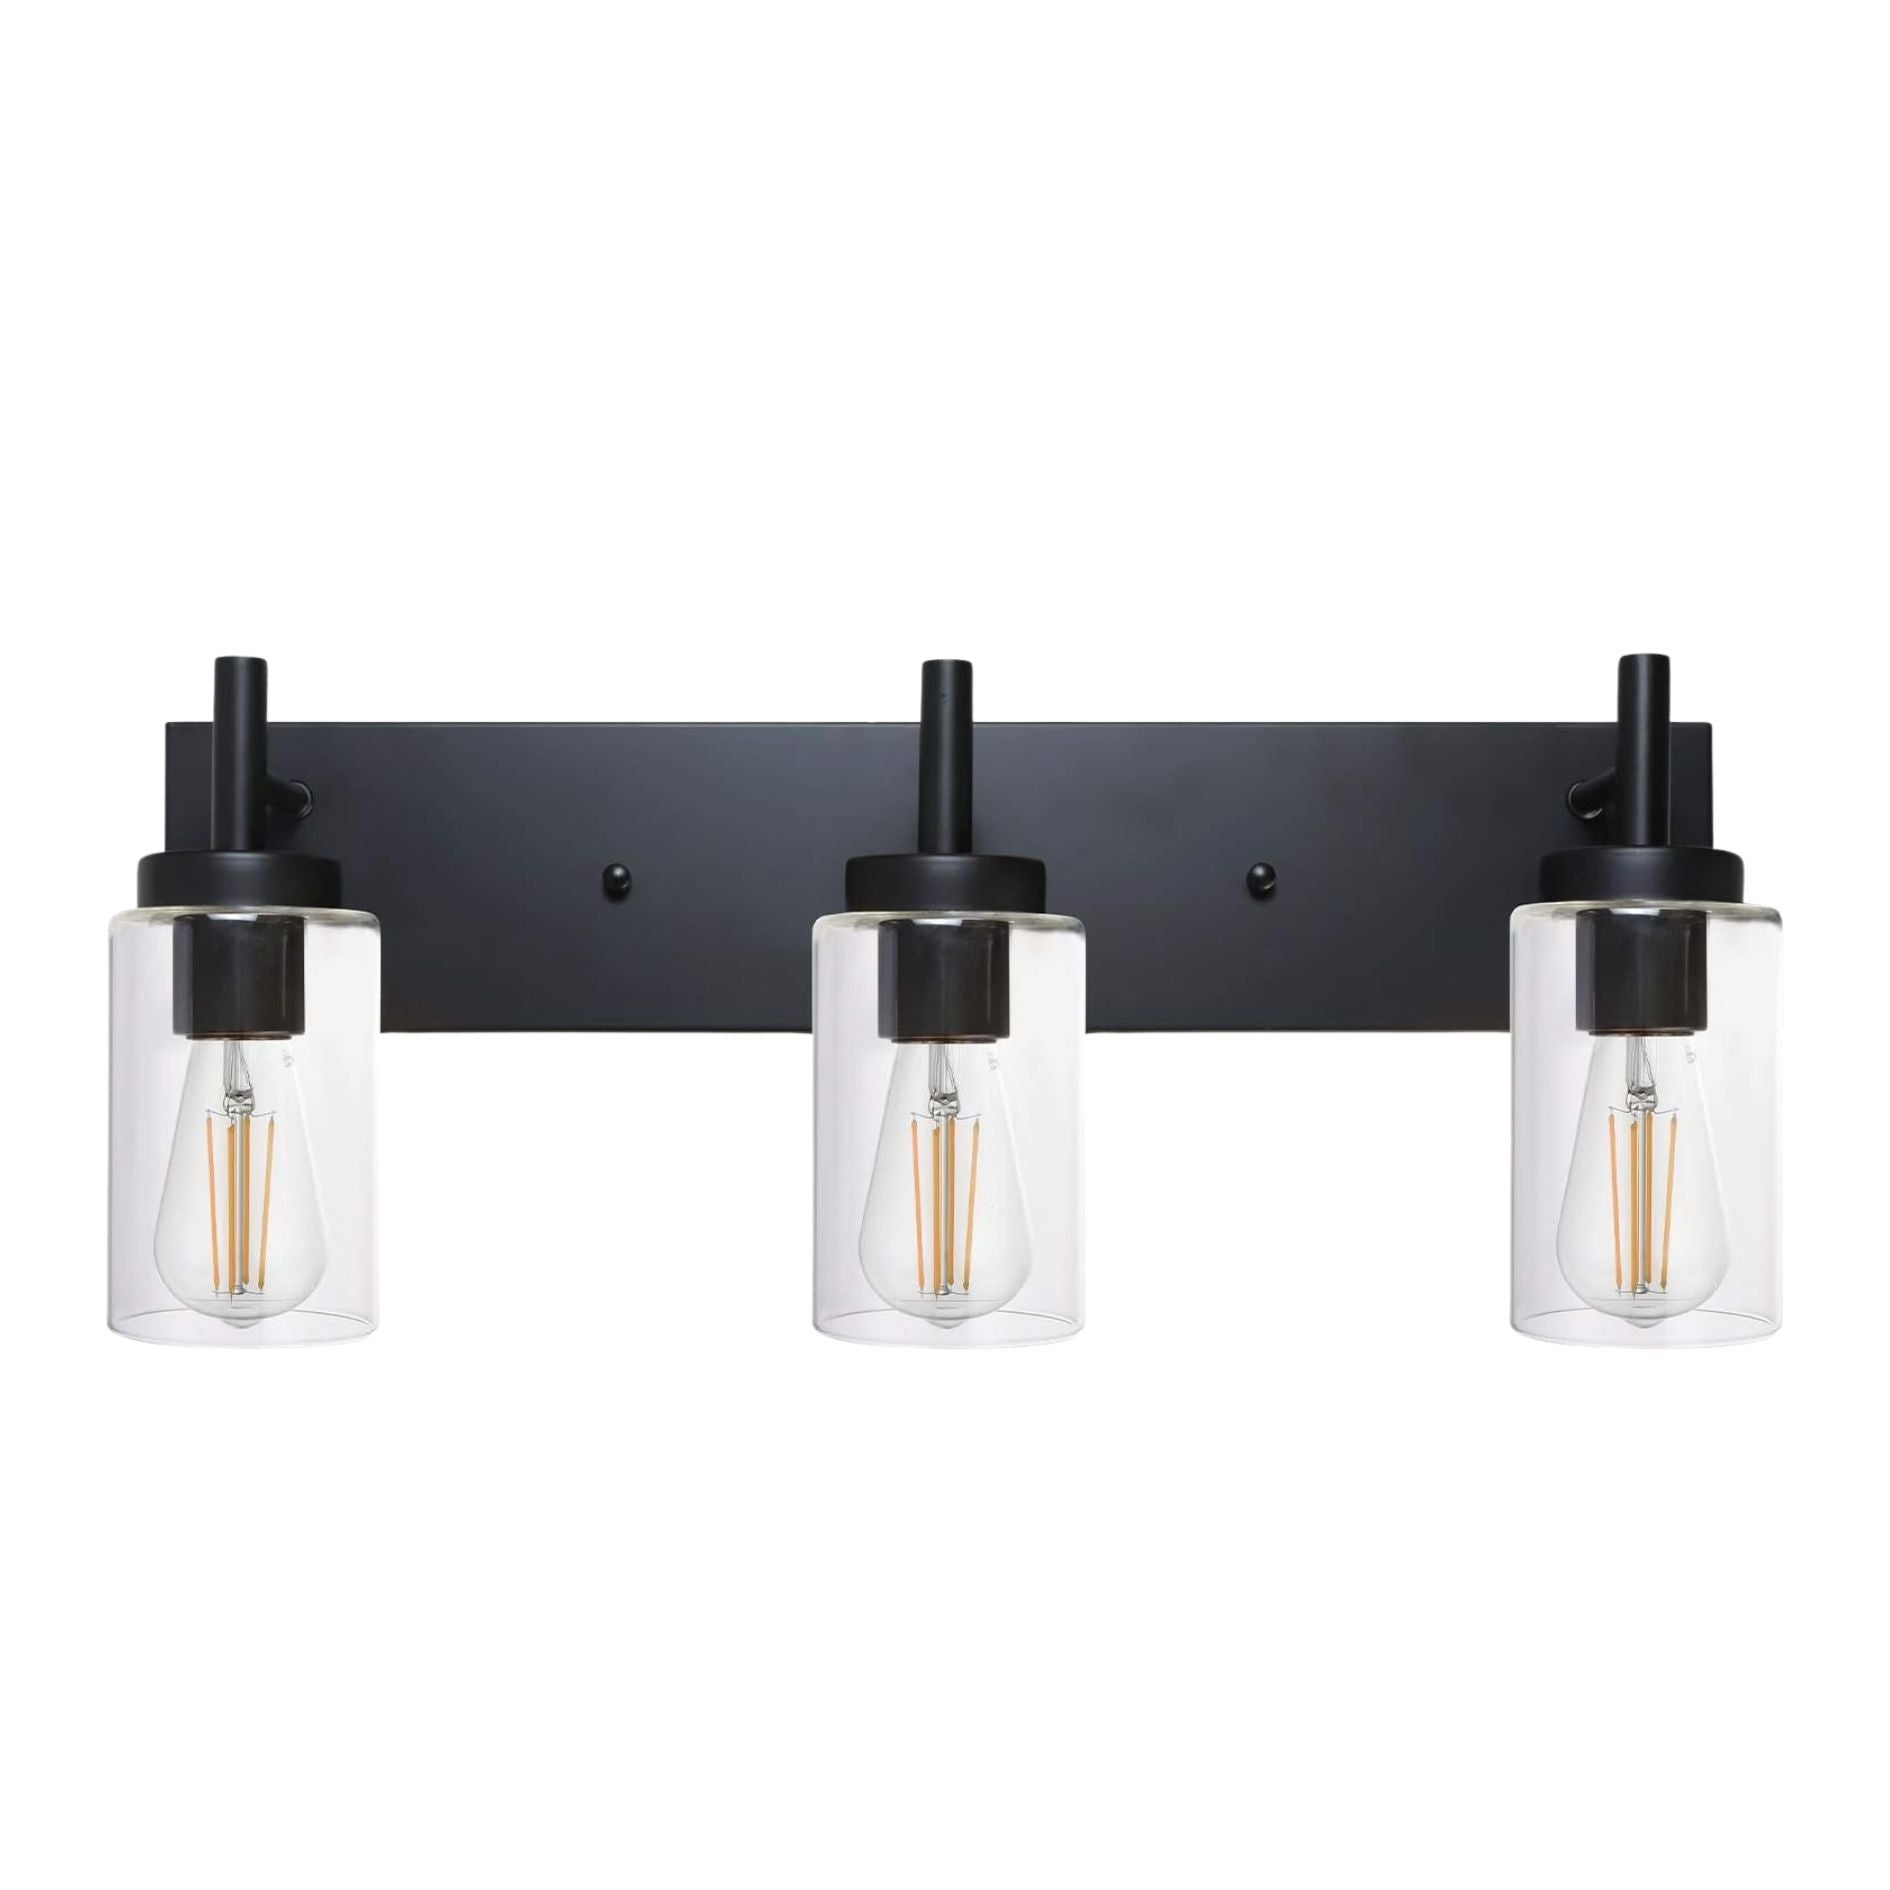 TM-HOME-Light-Fixture-Black-3-Lights-Rustic-Wall-Sconce-Lighting-with-Clear-Glass-Shade-Wall-Lighting